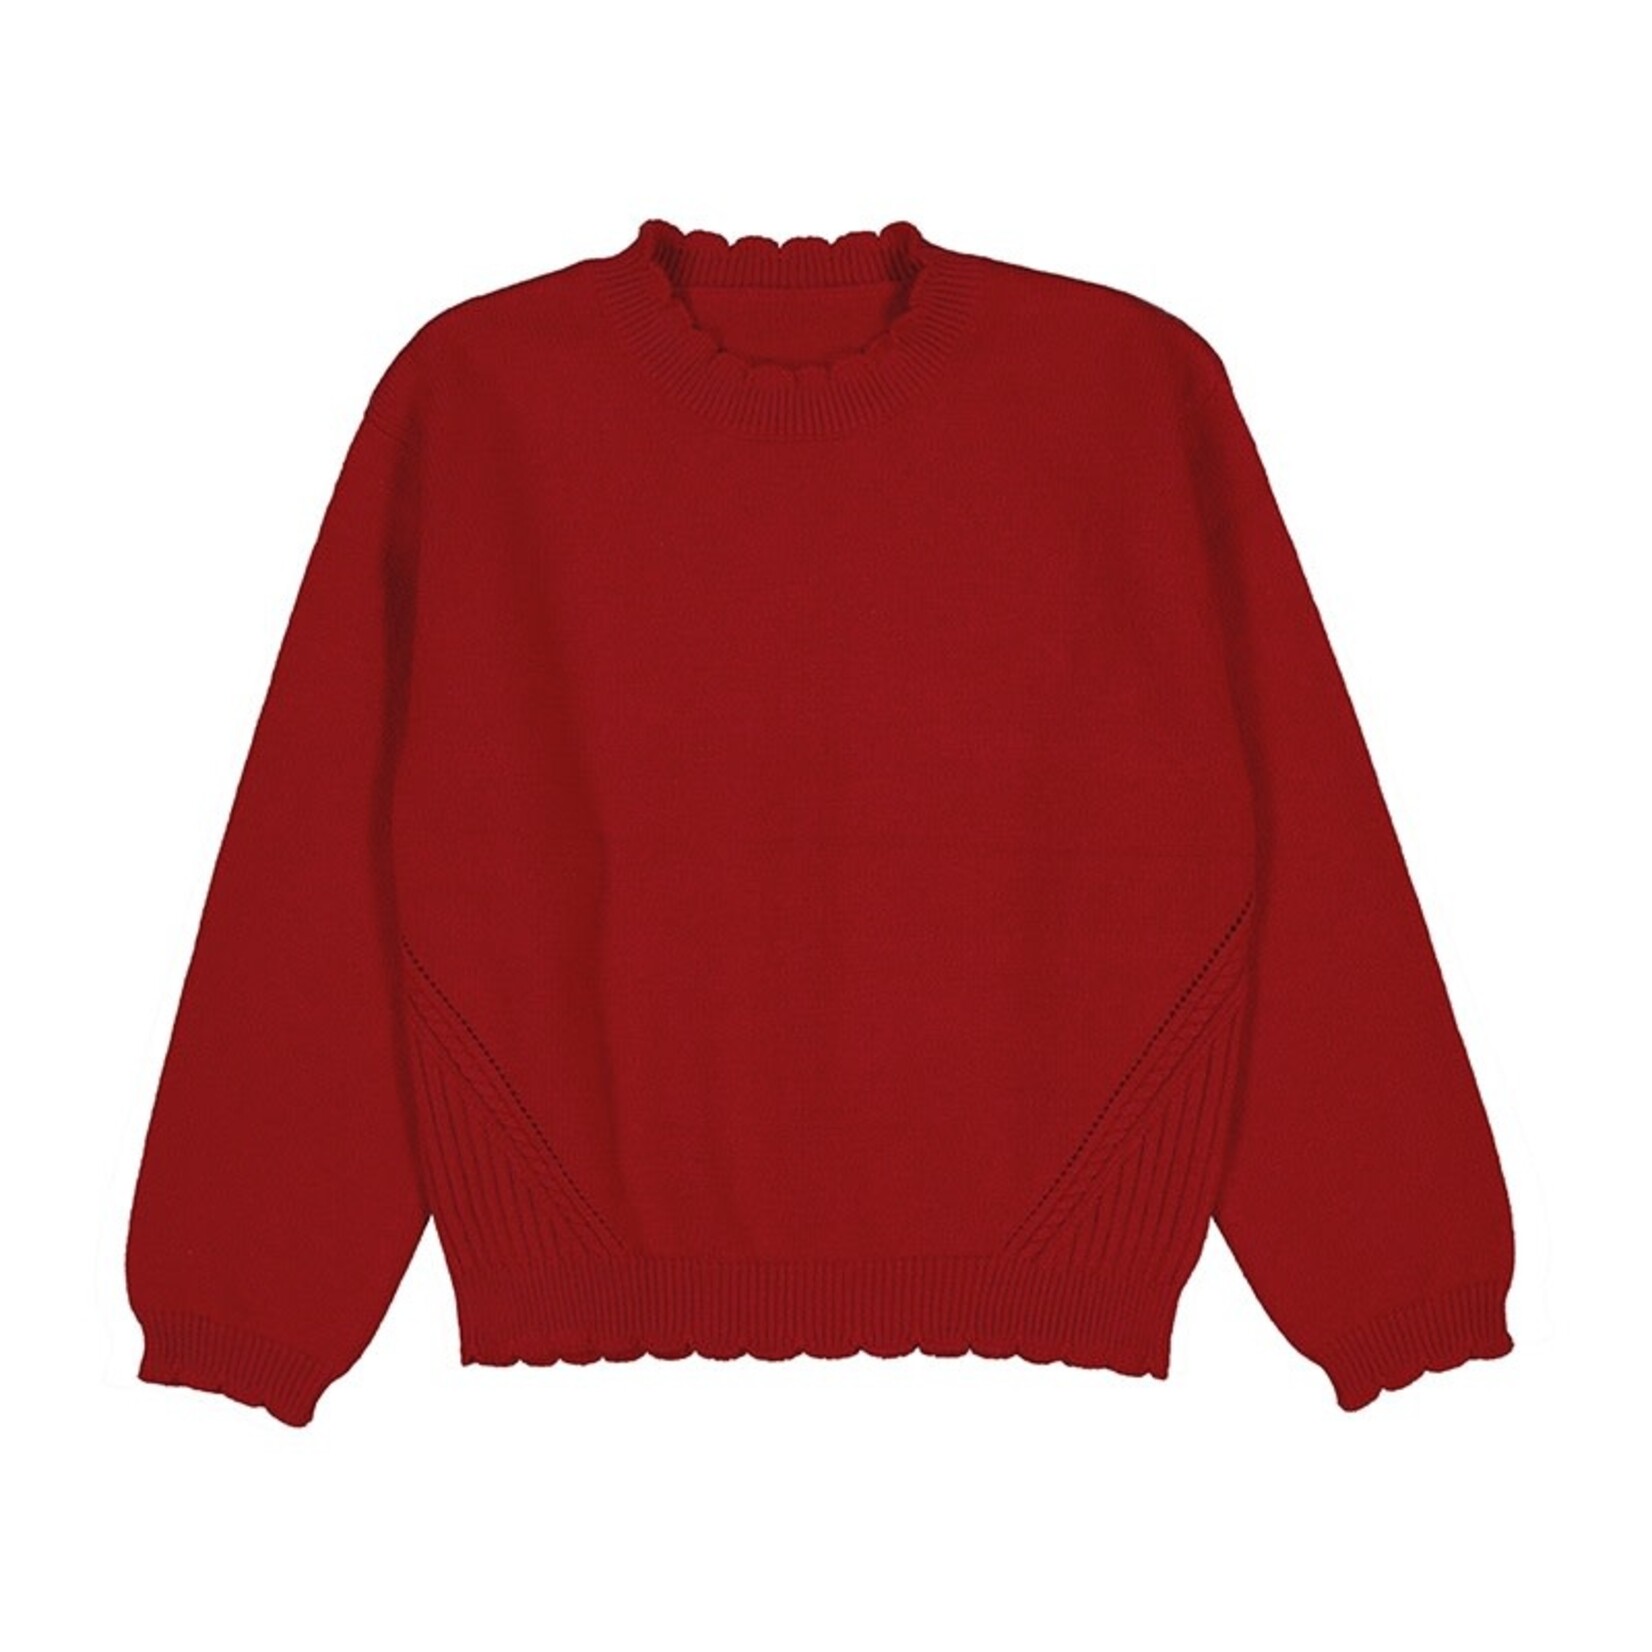 Mayoral MAYORAL - Plain Red Knit Sweater